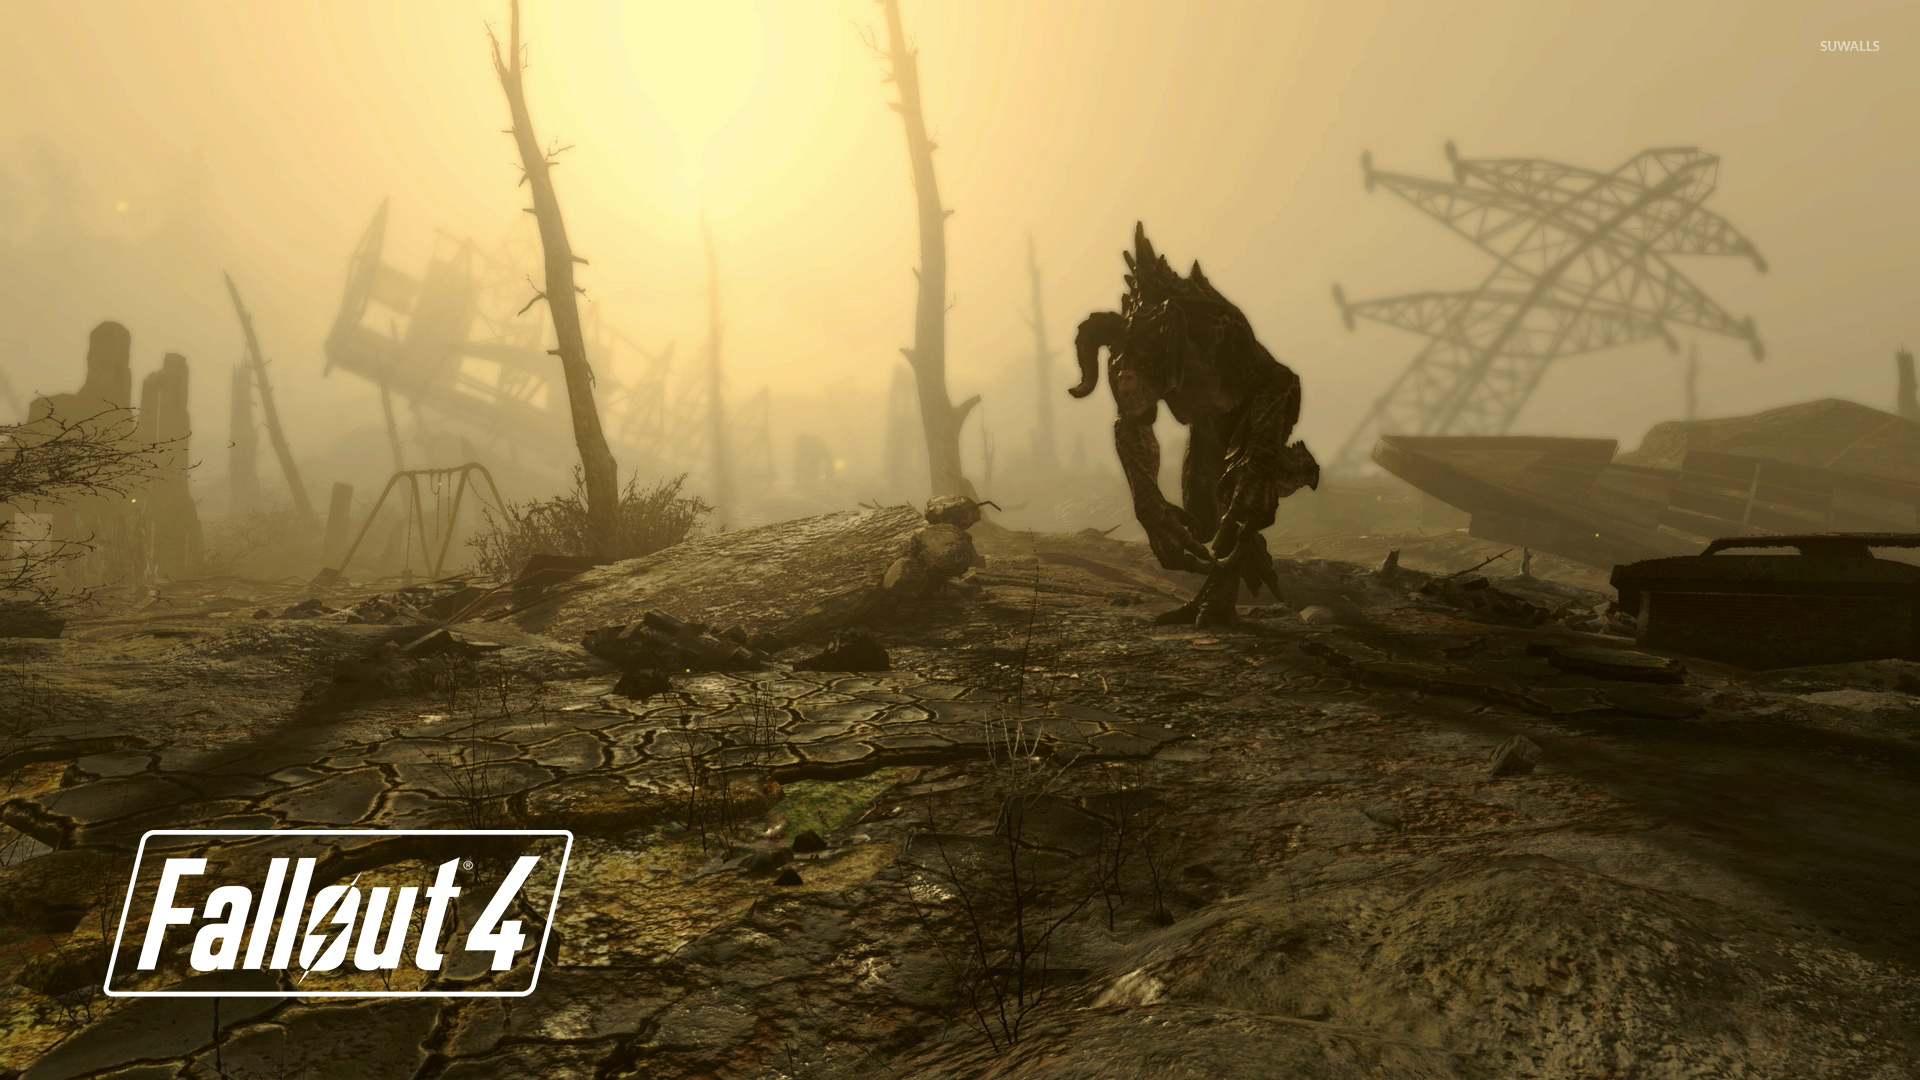 deathclaw in fallout 4 wallpaper game wallpapers 49677 deathclaw in fallout 4 wallpaper game